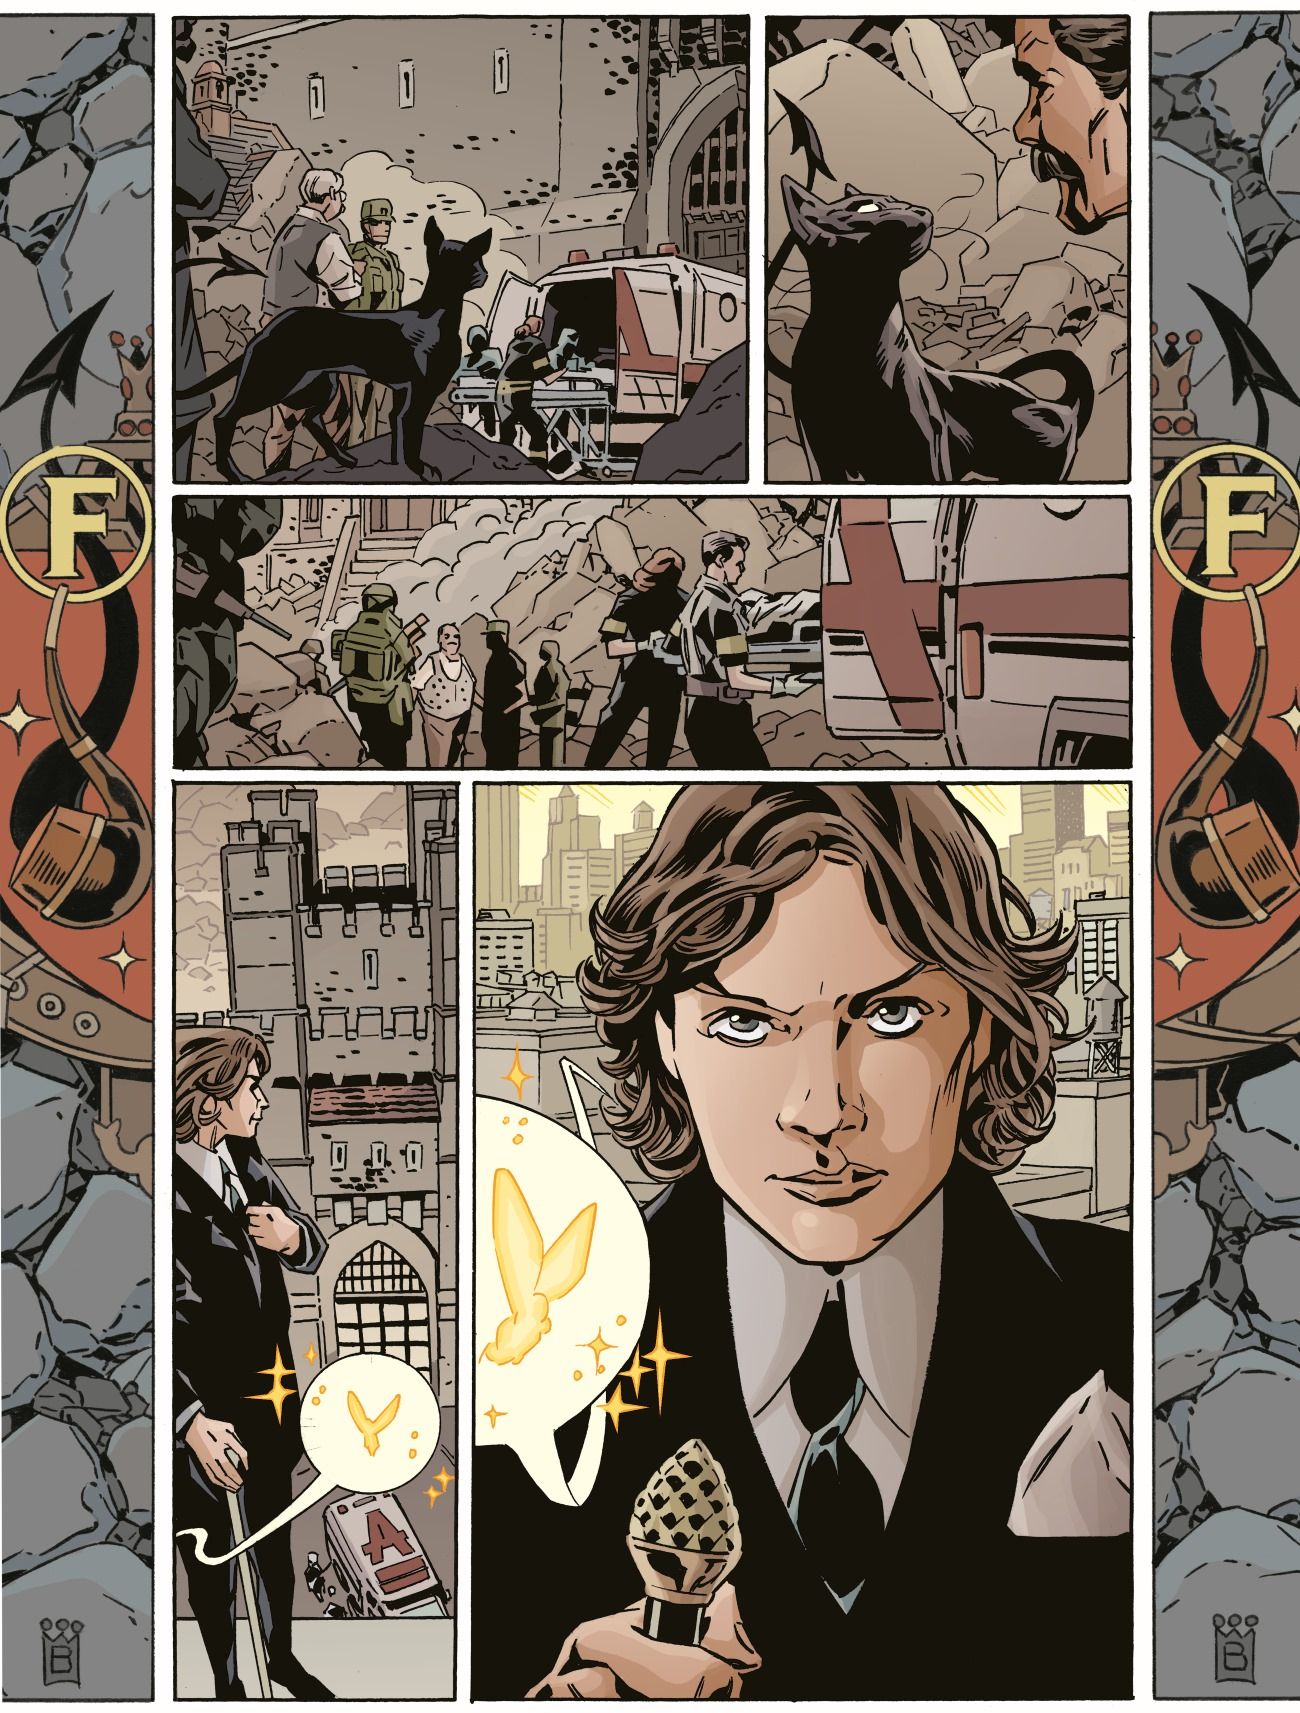 Exclusive FABLES Creator Bill Willingham Talks The Return & Future of The Series